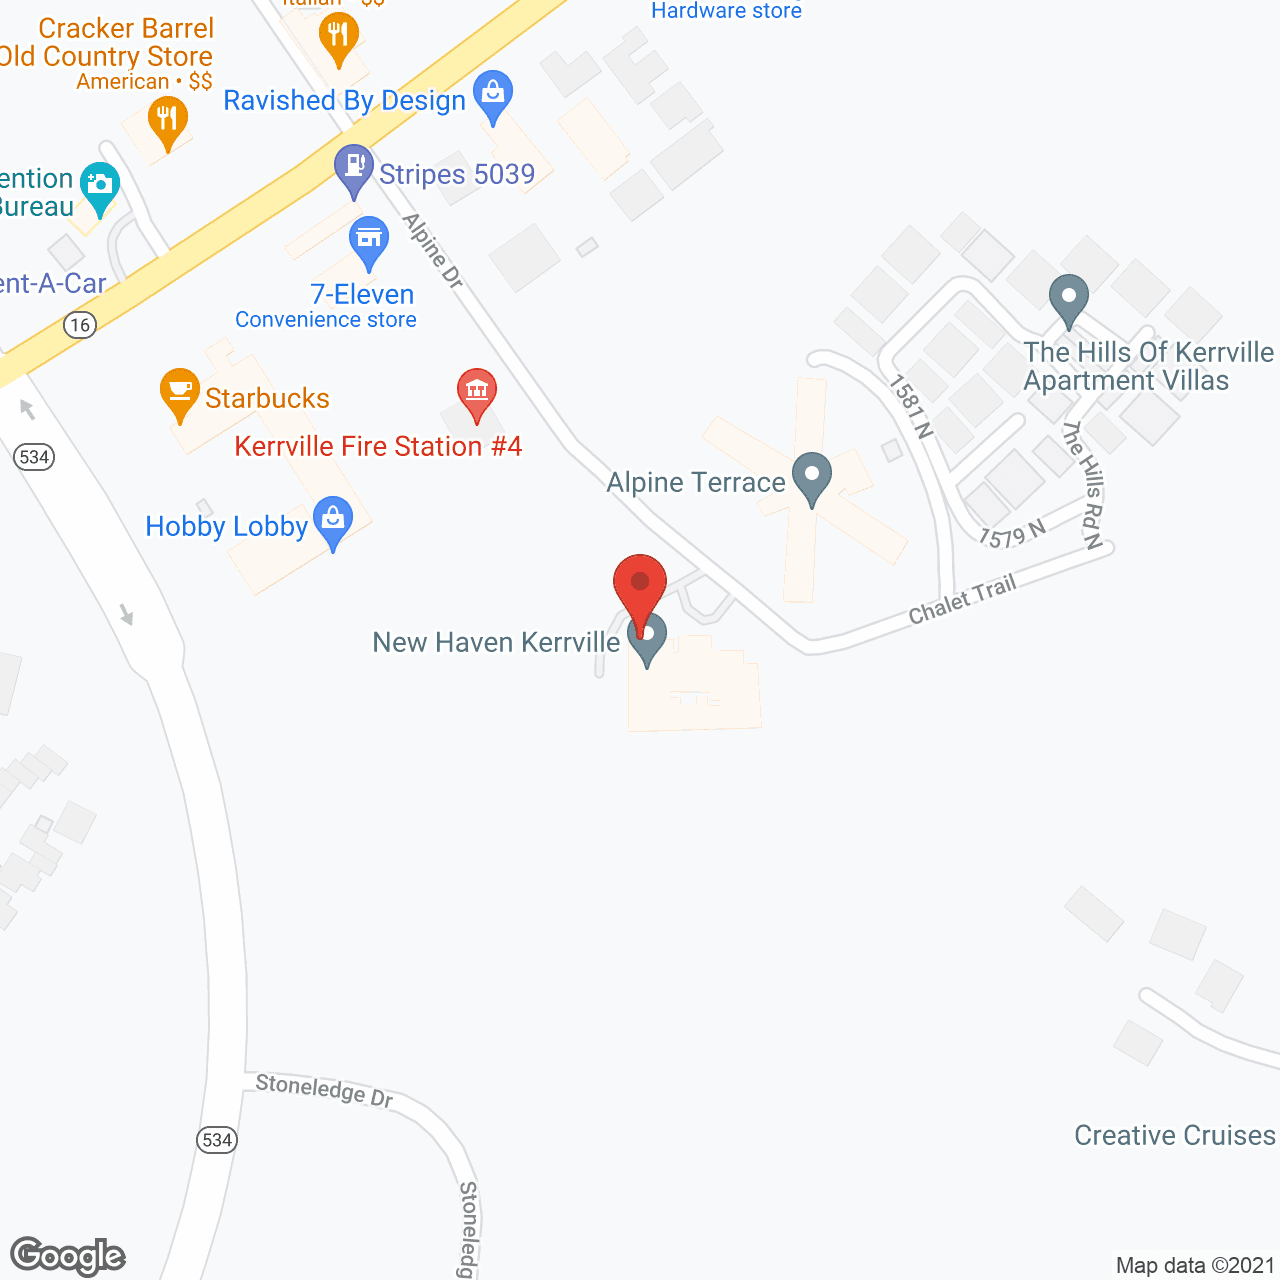 New Haven Memory Care of Kerrville in google map